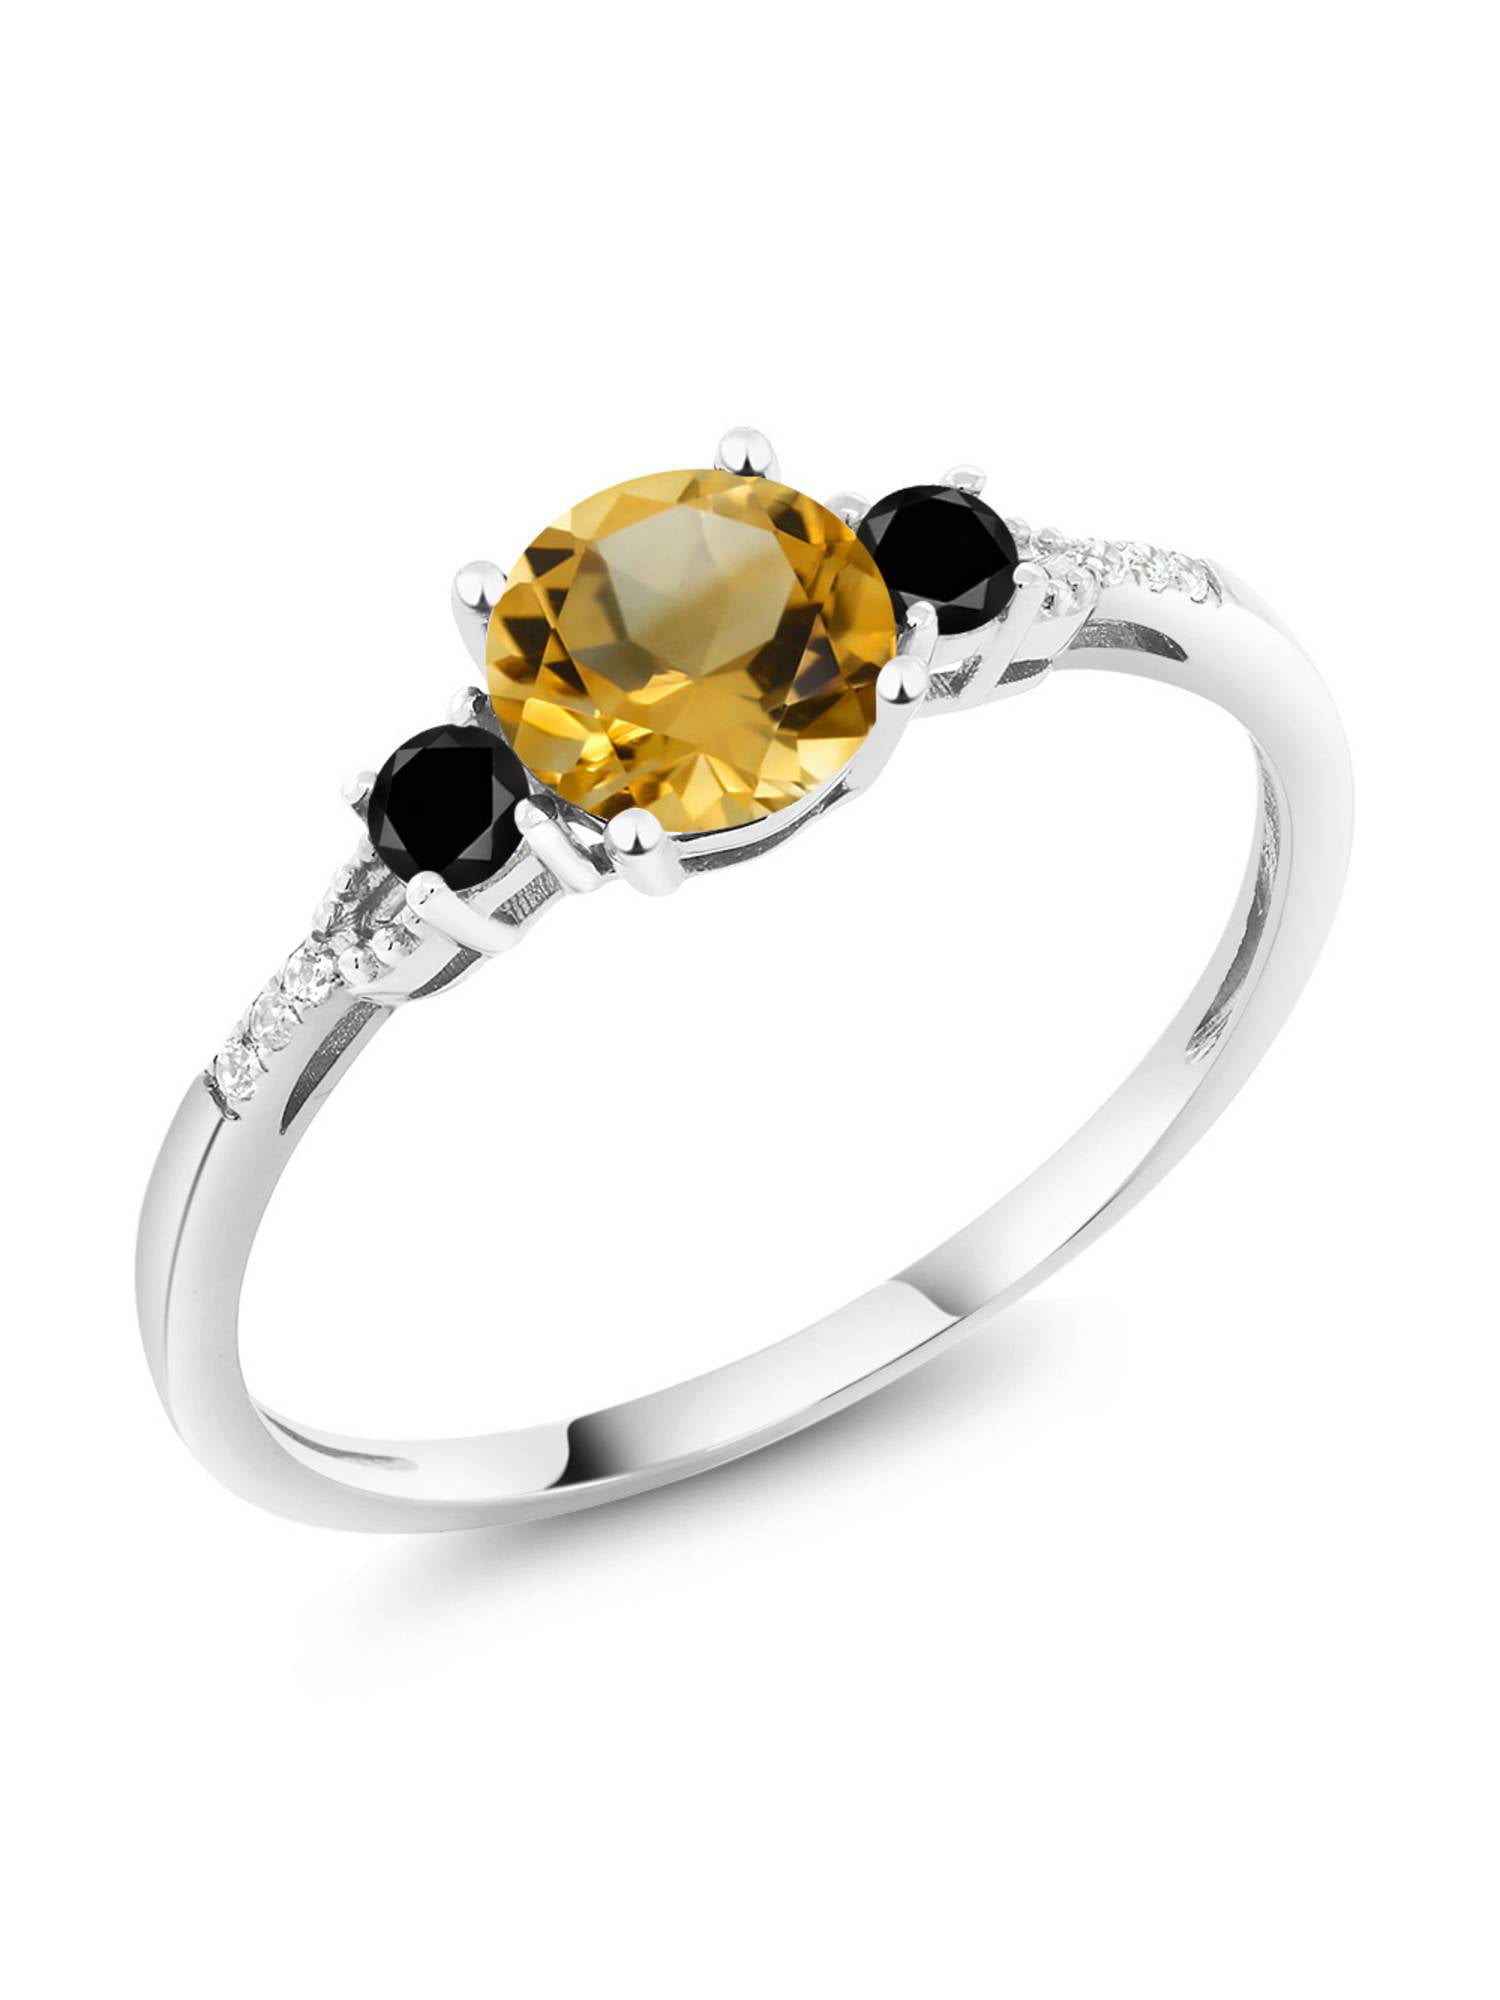 Details about   Vintage Pave Diamond Handmade Citrine Gemstone Jewelry 925 Sterling Silver Rings 